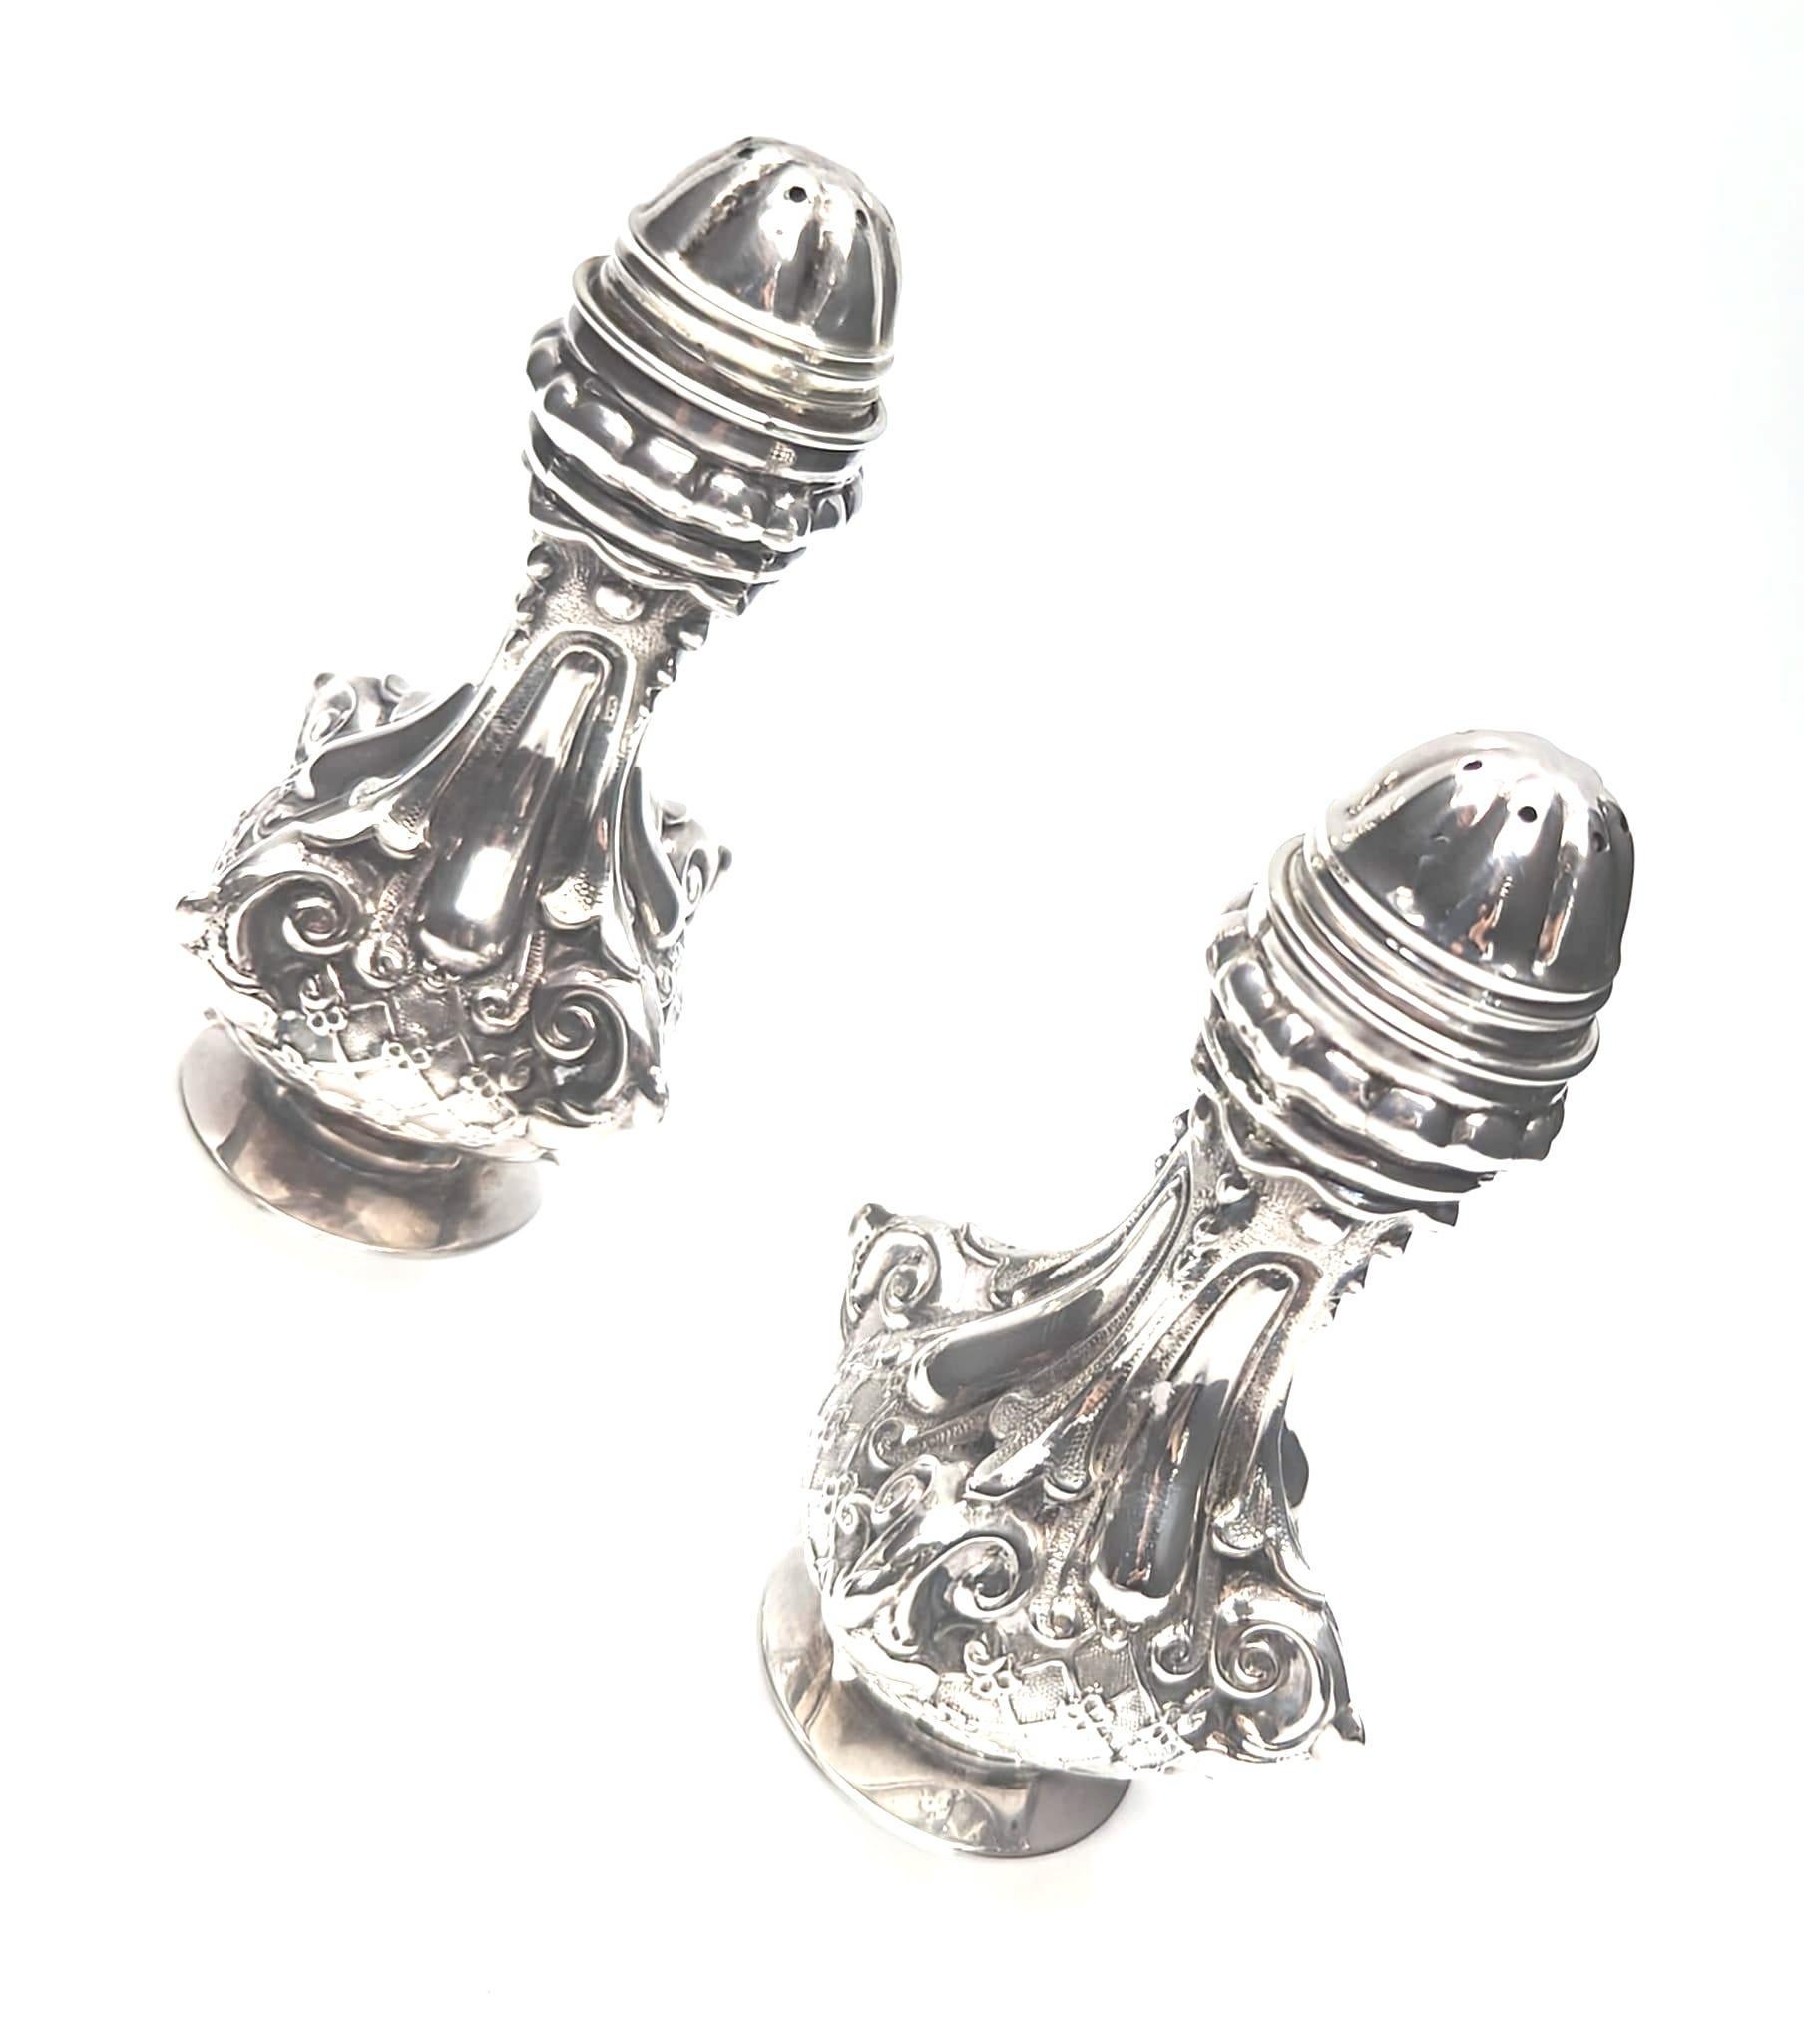 Vintage Hazorfim Sterling Silver Salt & Pepper Shakers, a Pair In Good Condition For Sale In Miami, FL